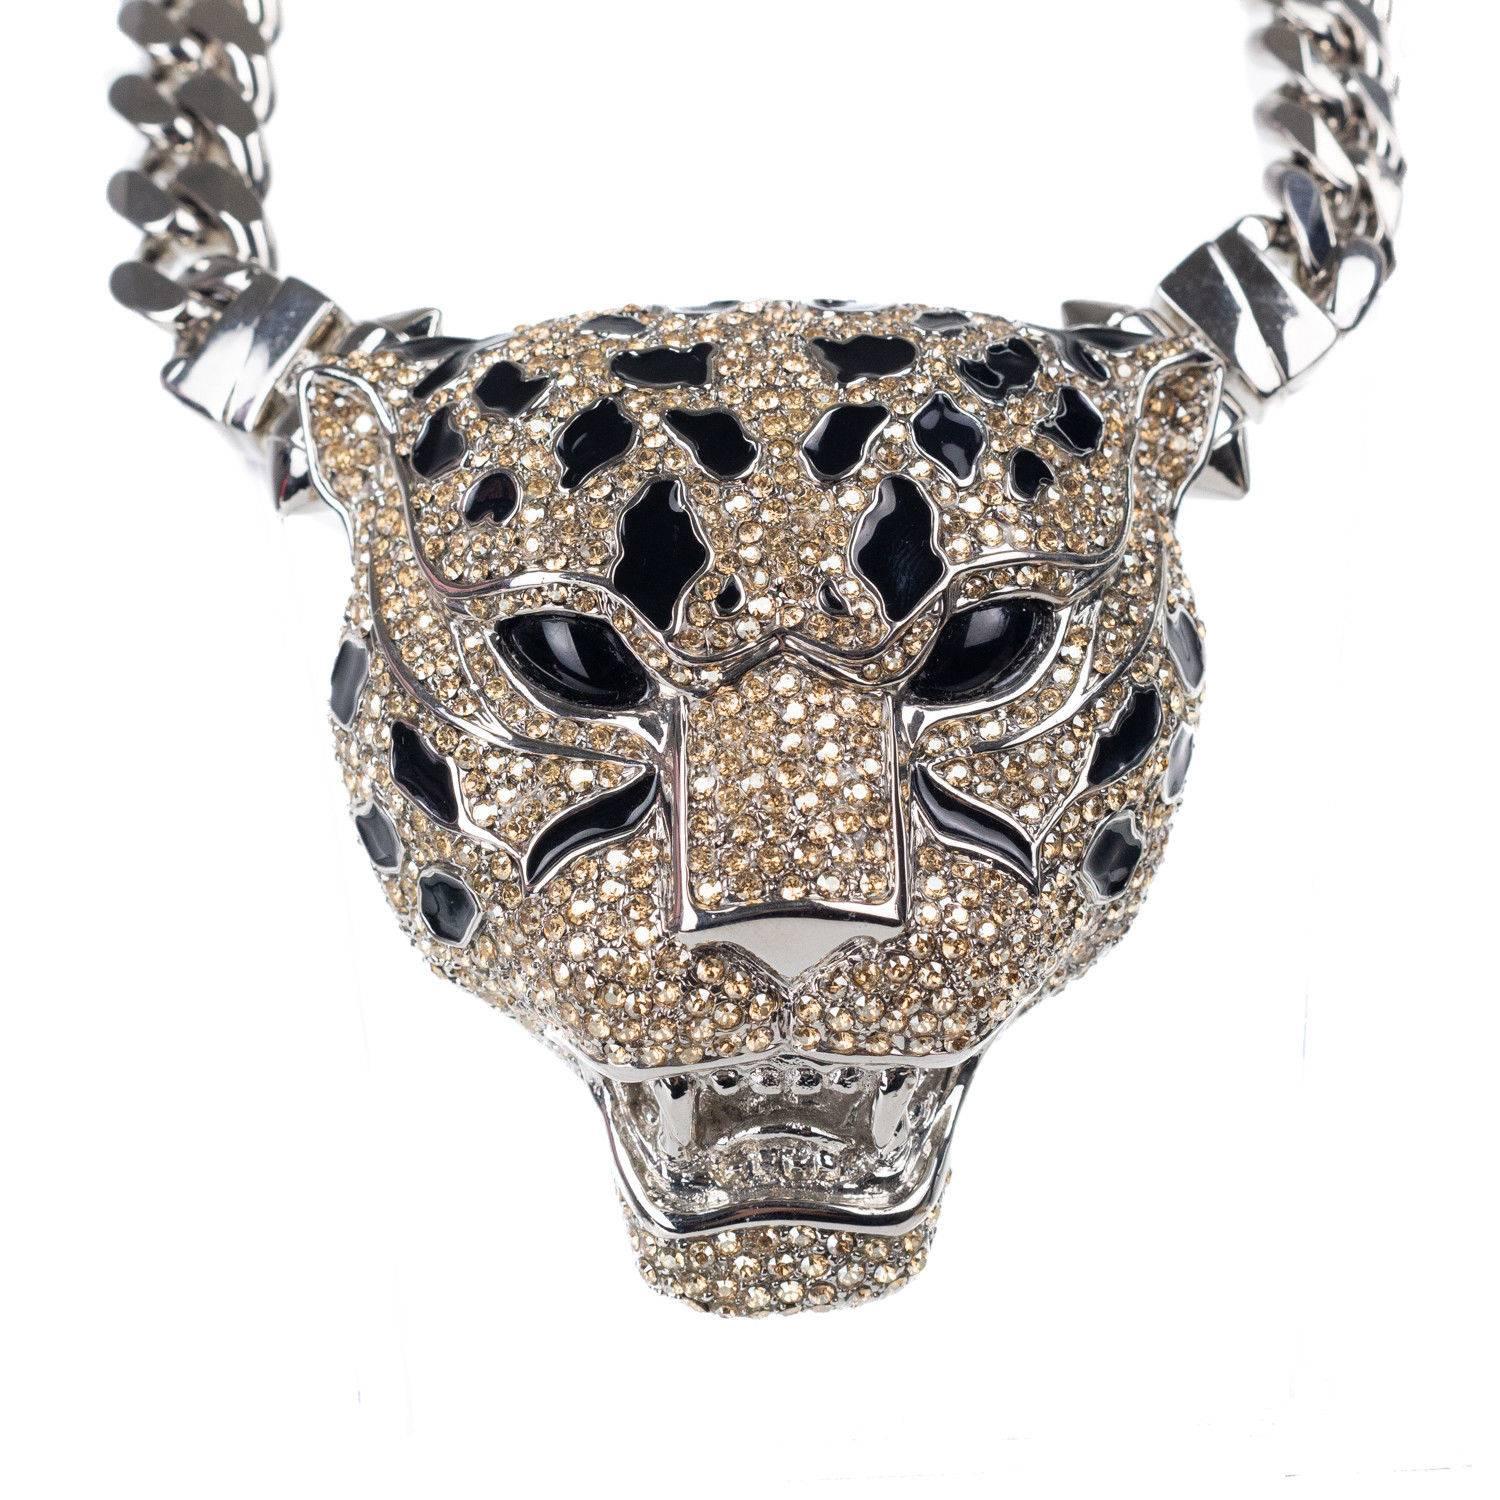 Sparkling with pavé Swarovski crystals Roberto Cavallis silver plated brass panther necklace is enameled with black resin and has bright red eyes. Statement but not too weighty this chunky piece secures with a sturdy chain to sit comfortably around